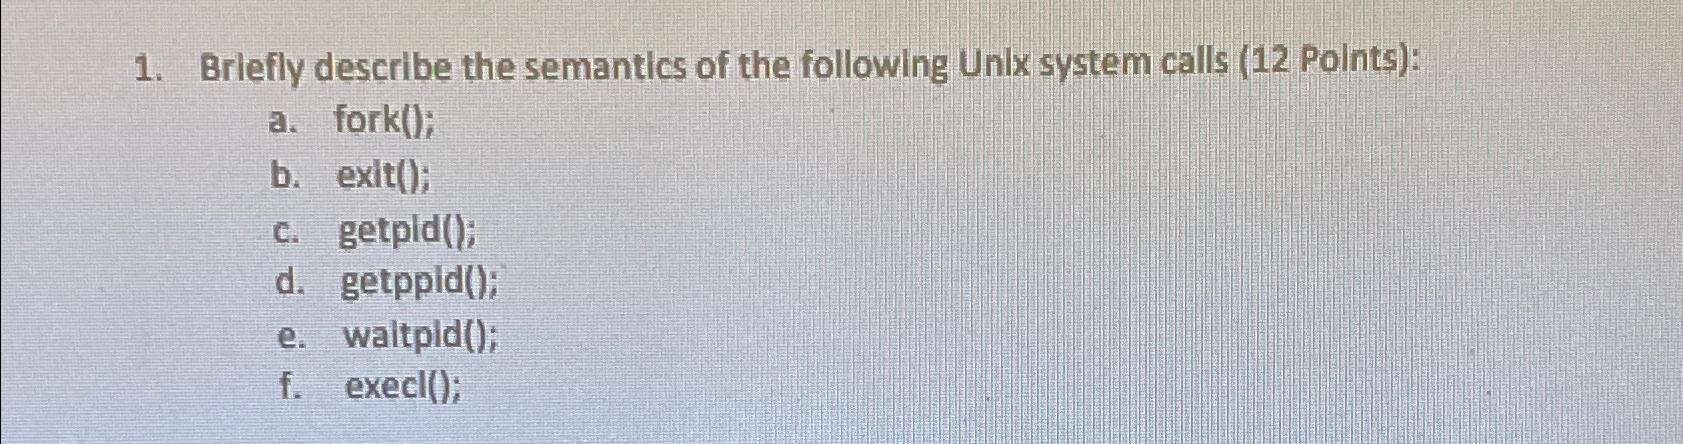 1. Briefly describe the semantics of the following Unix system calls (12 Points): a. fork(); b. exit(); c.